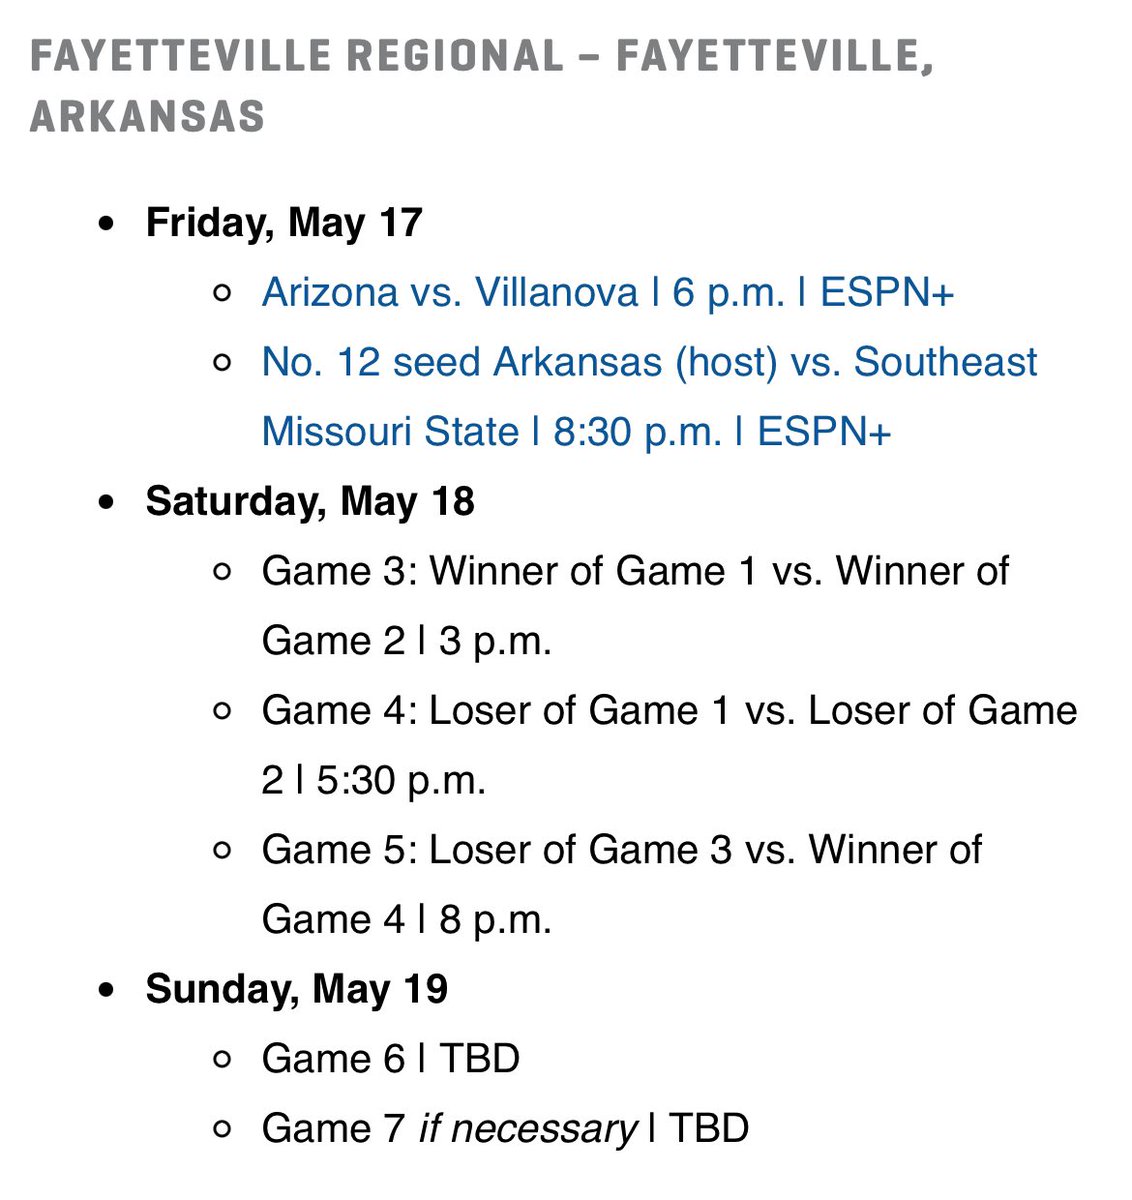 More game times for the Fayetteville Regional at Bogle! If Arkansas wins on Friday they’ll play at 2pm CT on Saturday. (Bracket below in ET)